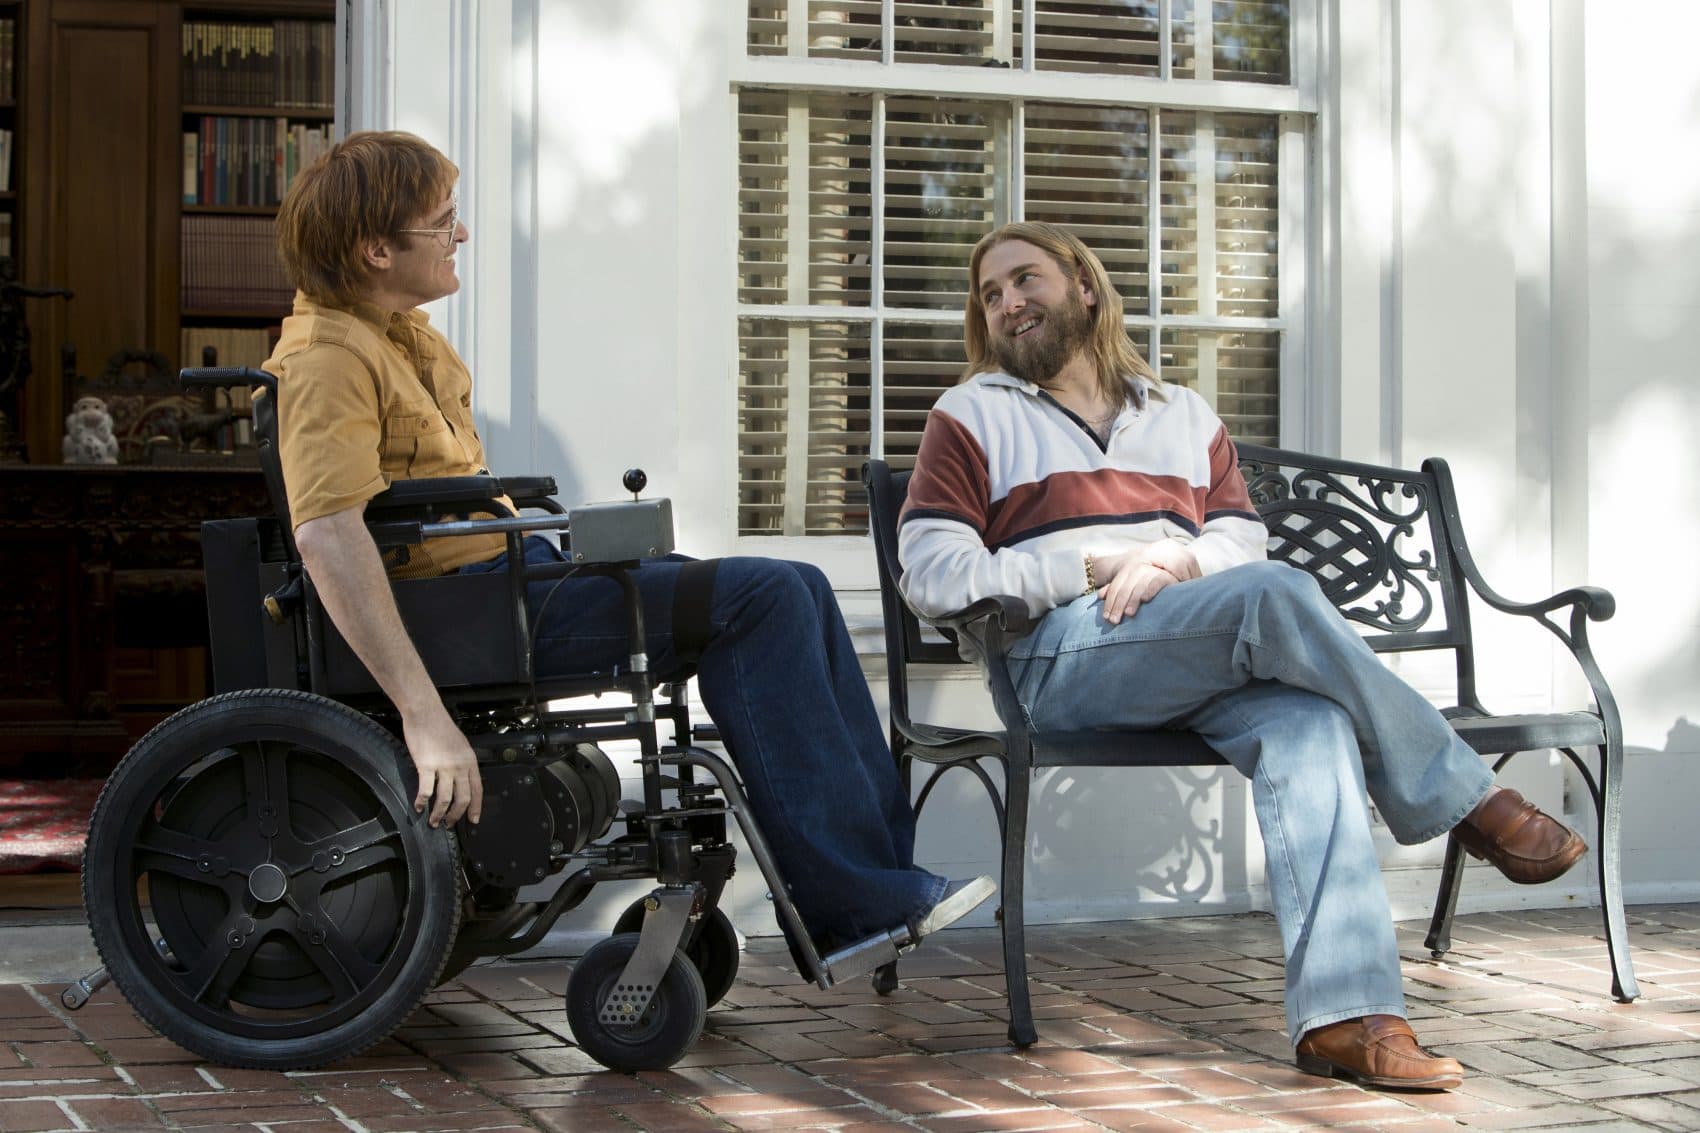 Joaquin Phoenix as John Callahan and Jonah Hill as Donnie star in &quot;Don't Worry, He Won't Get Far on Foot.&quot; (Courtesy Scott Patrick Green/Amazon Studios)